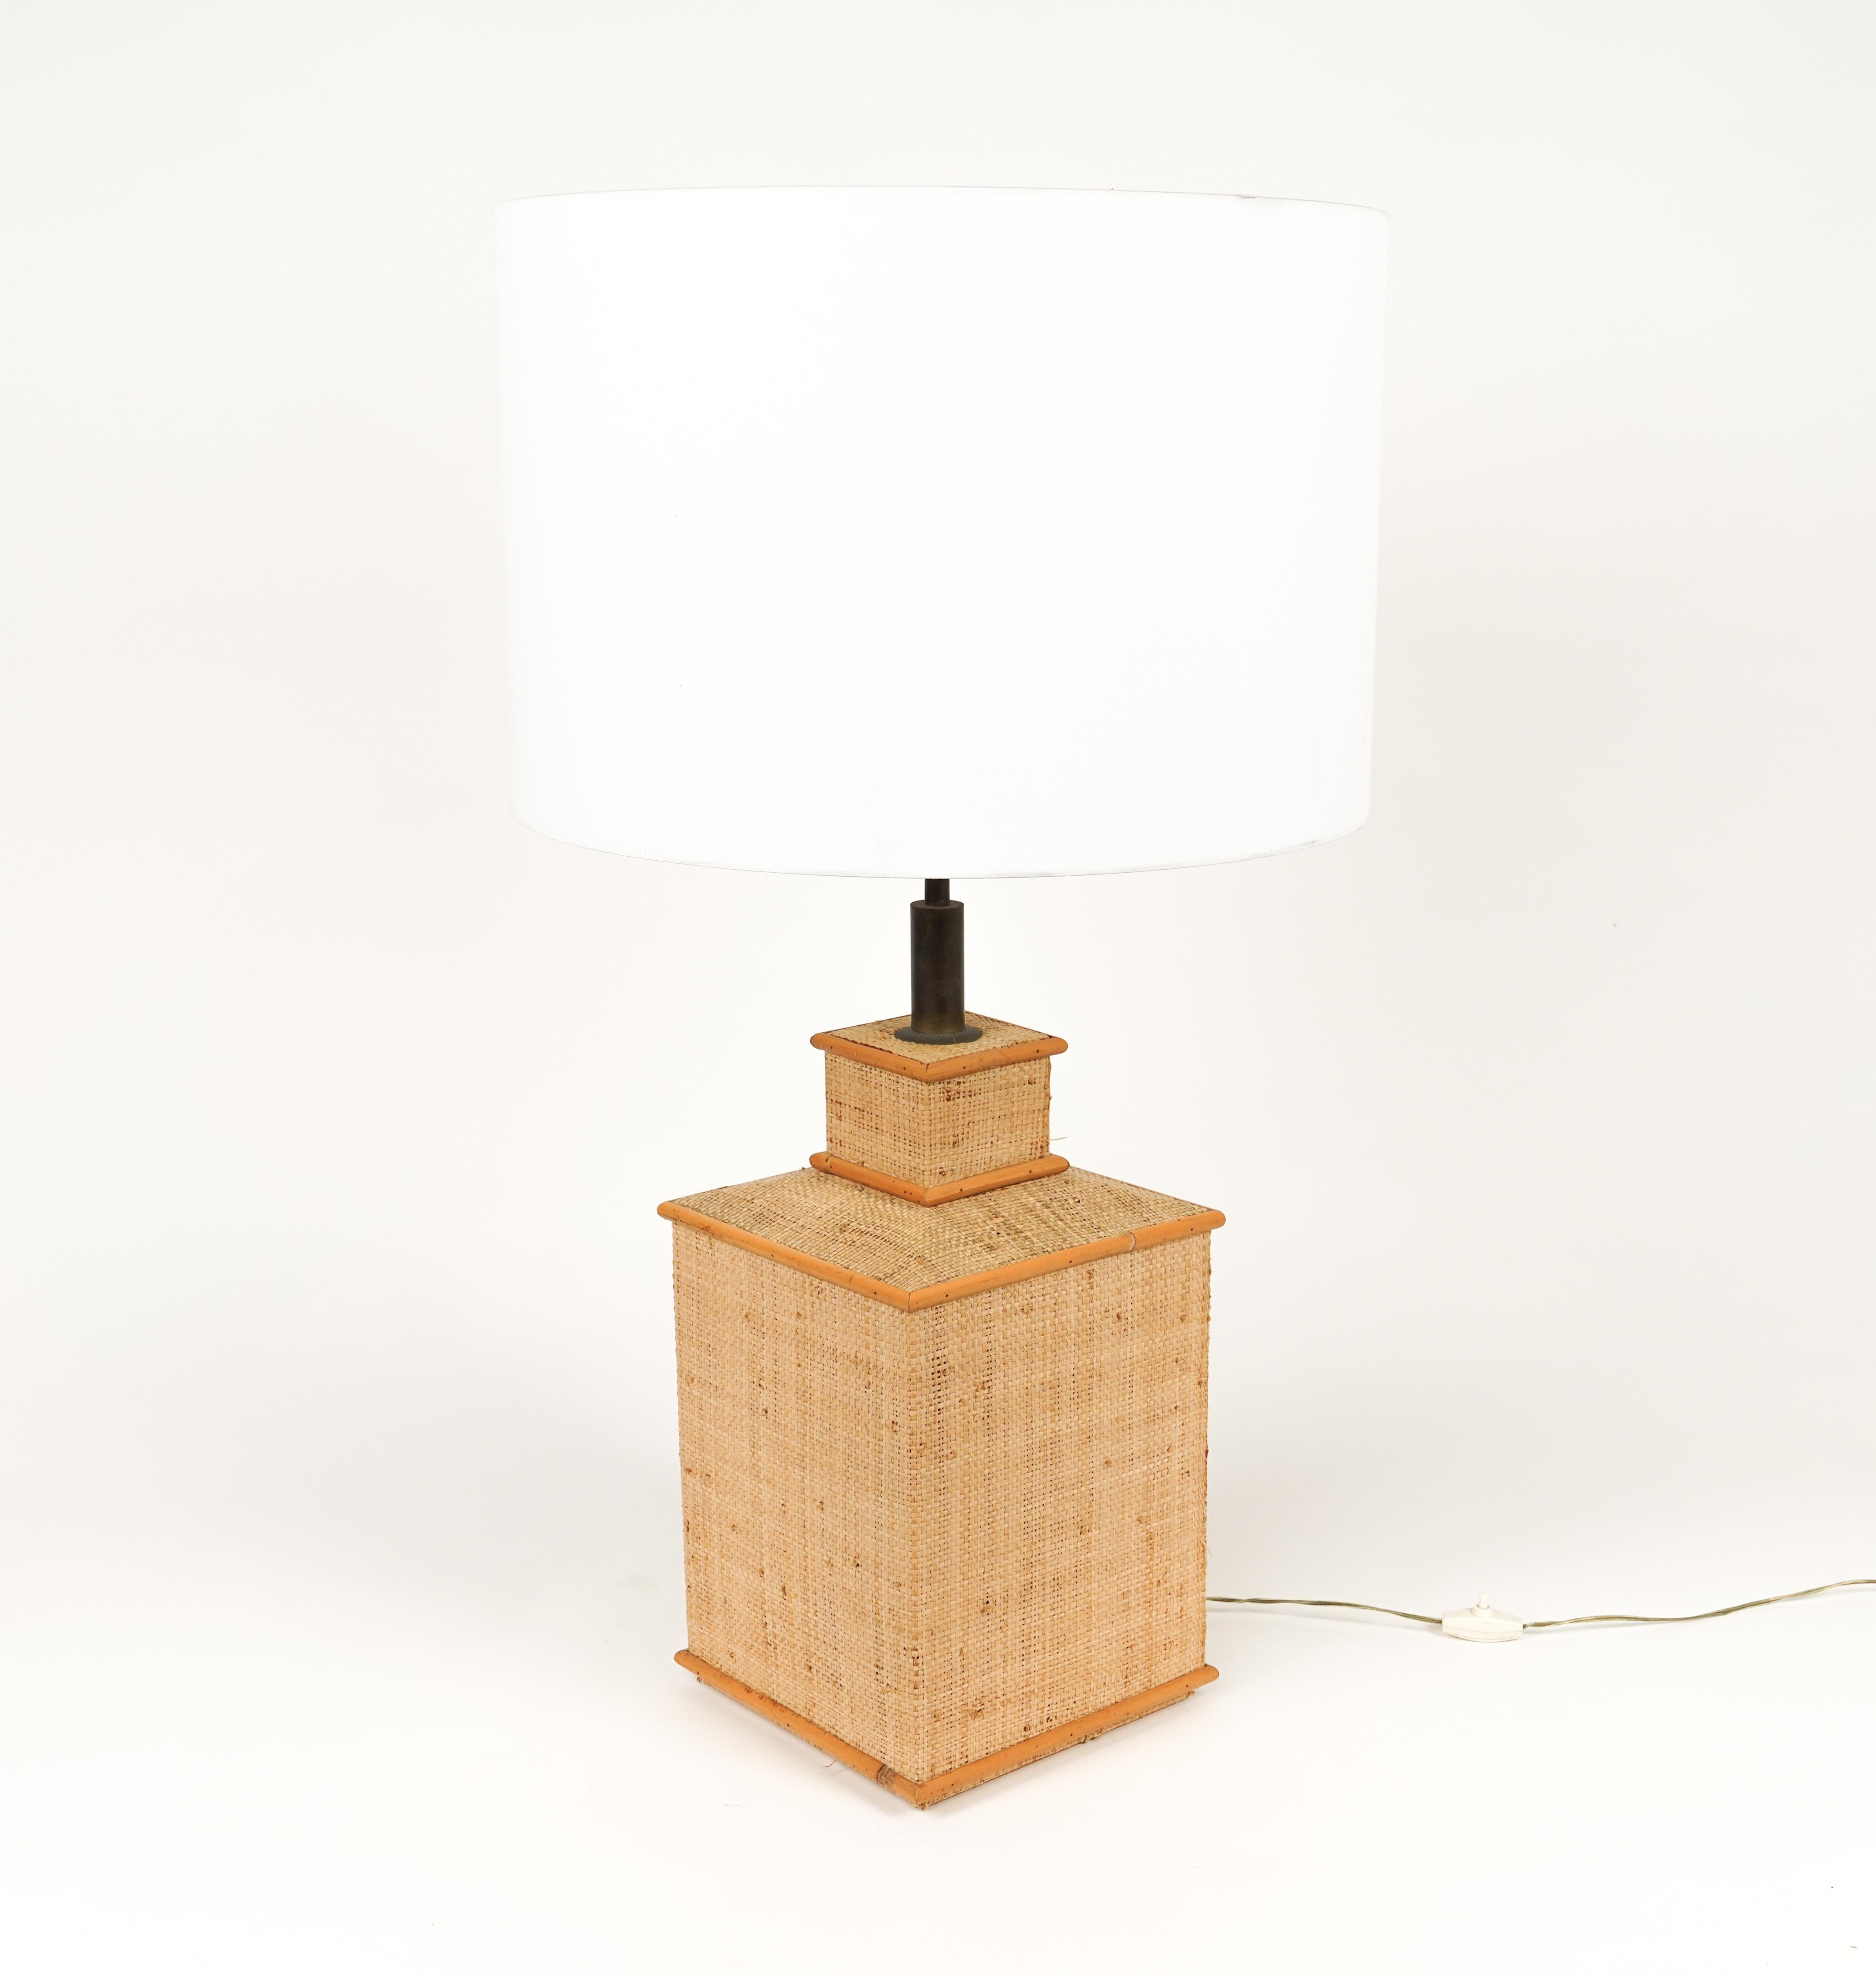 Fabric Midcentury Rattan, Wicker and Brass Table Lamp Vivai Del Sud Style, Italy 1960s For Sale